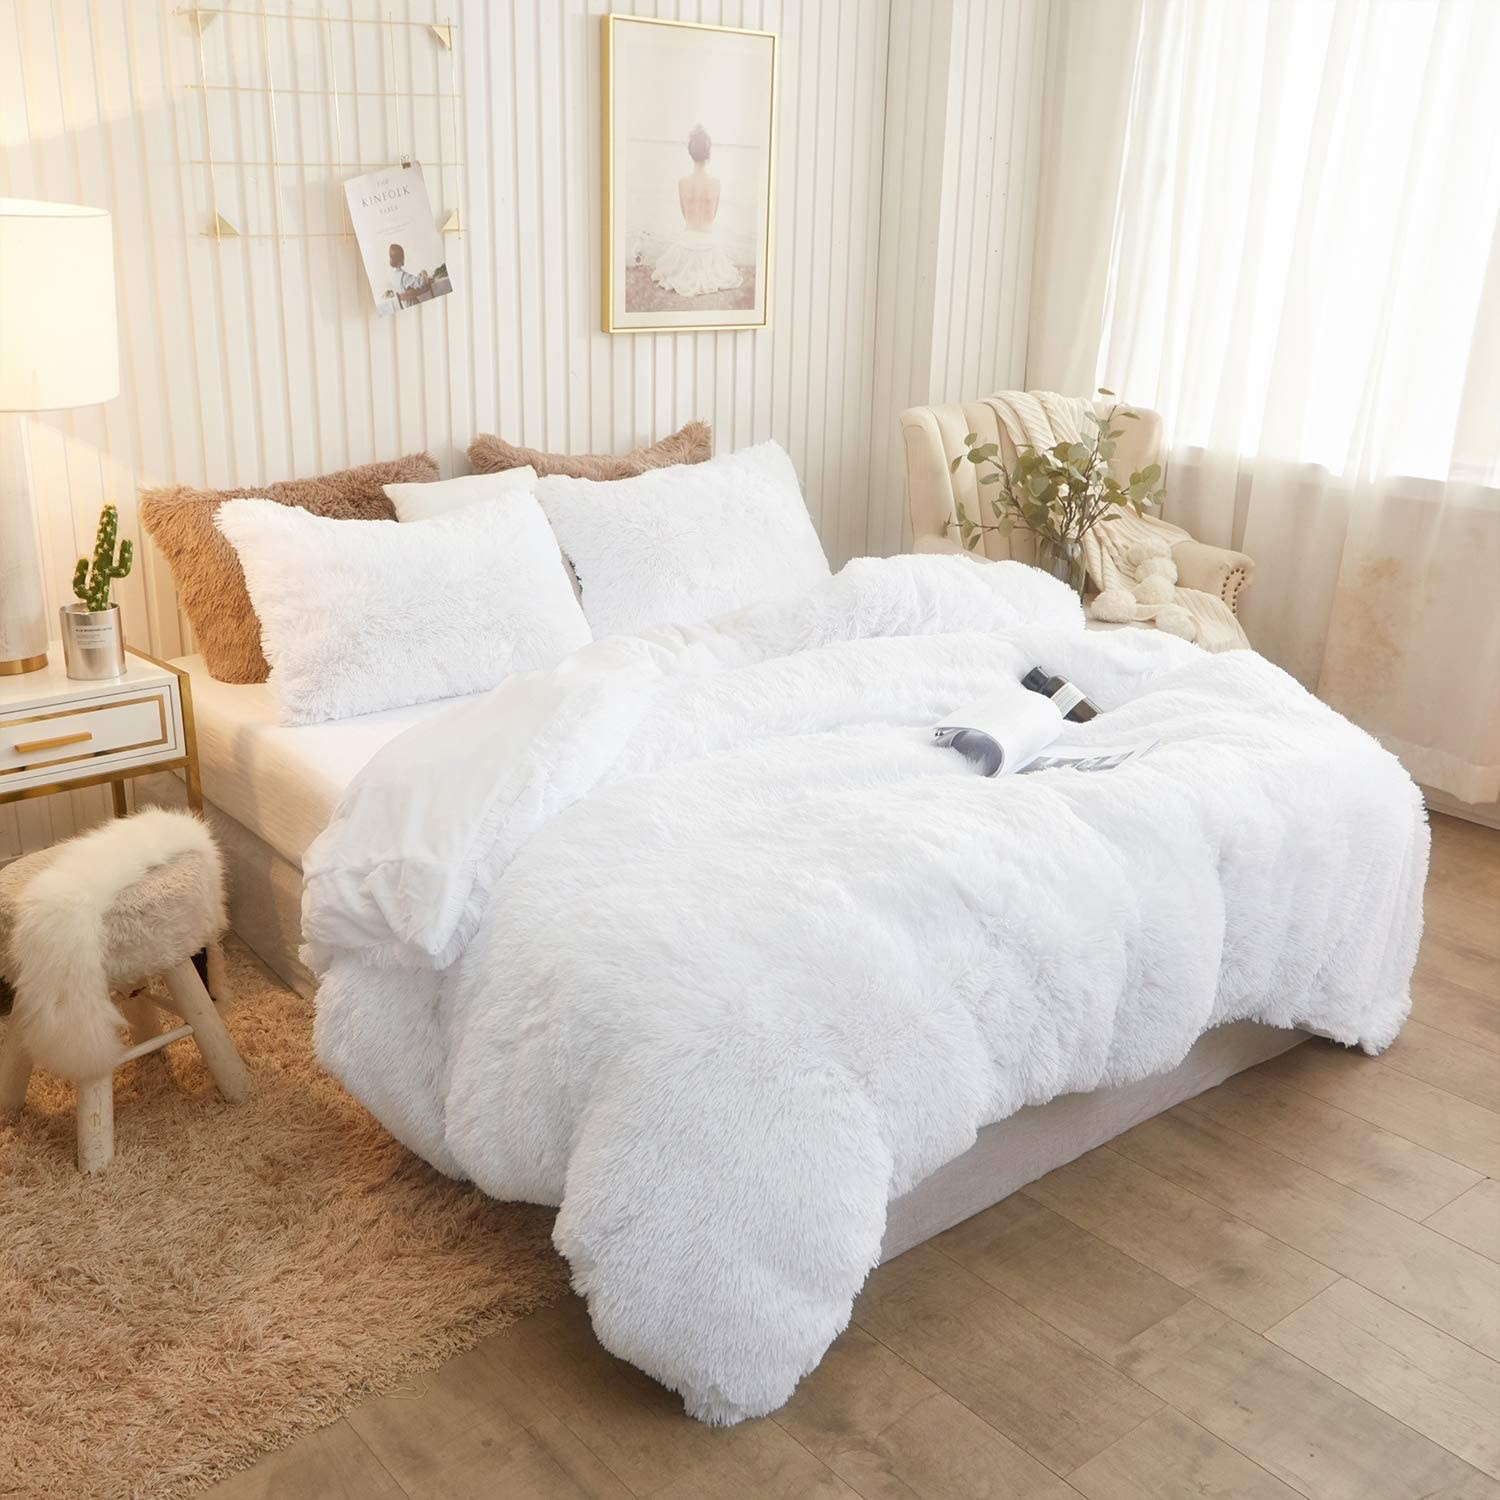 a fluffy bed set made of plush shag material in a scandinavian style bedroom